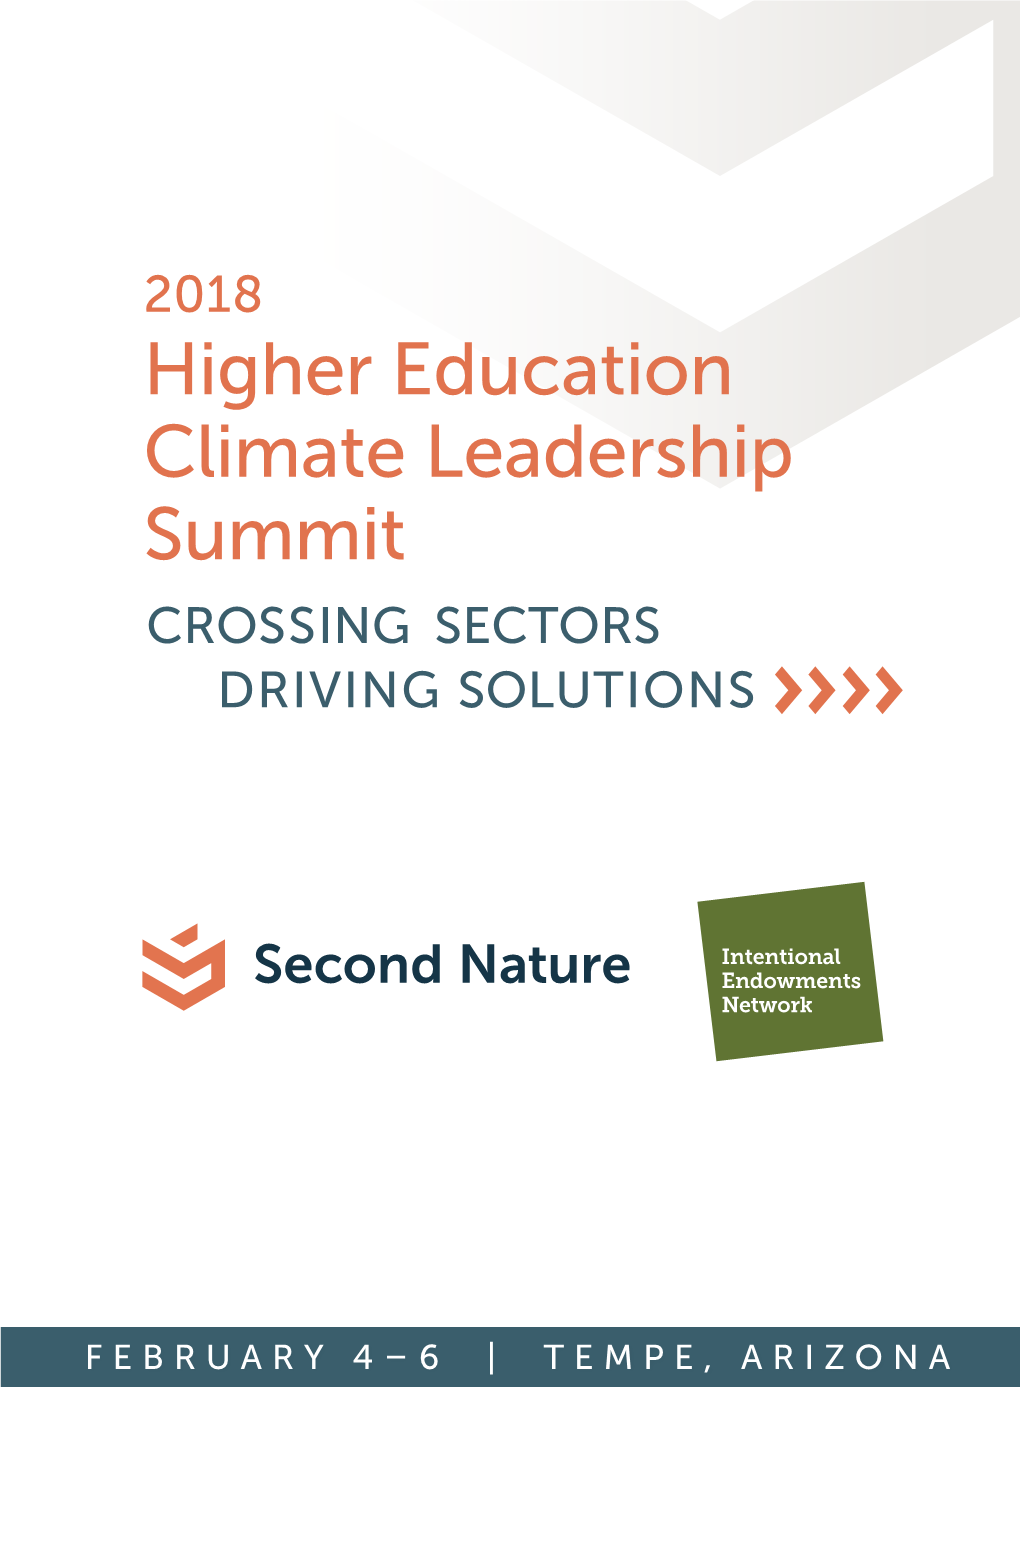 Higher Education Climate Leadership Summit CROSSING SECTORS DRIVING SOLUTIONS